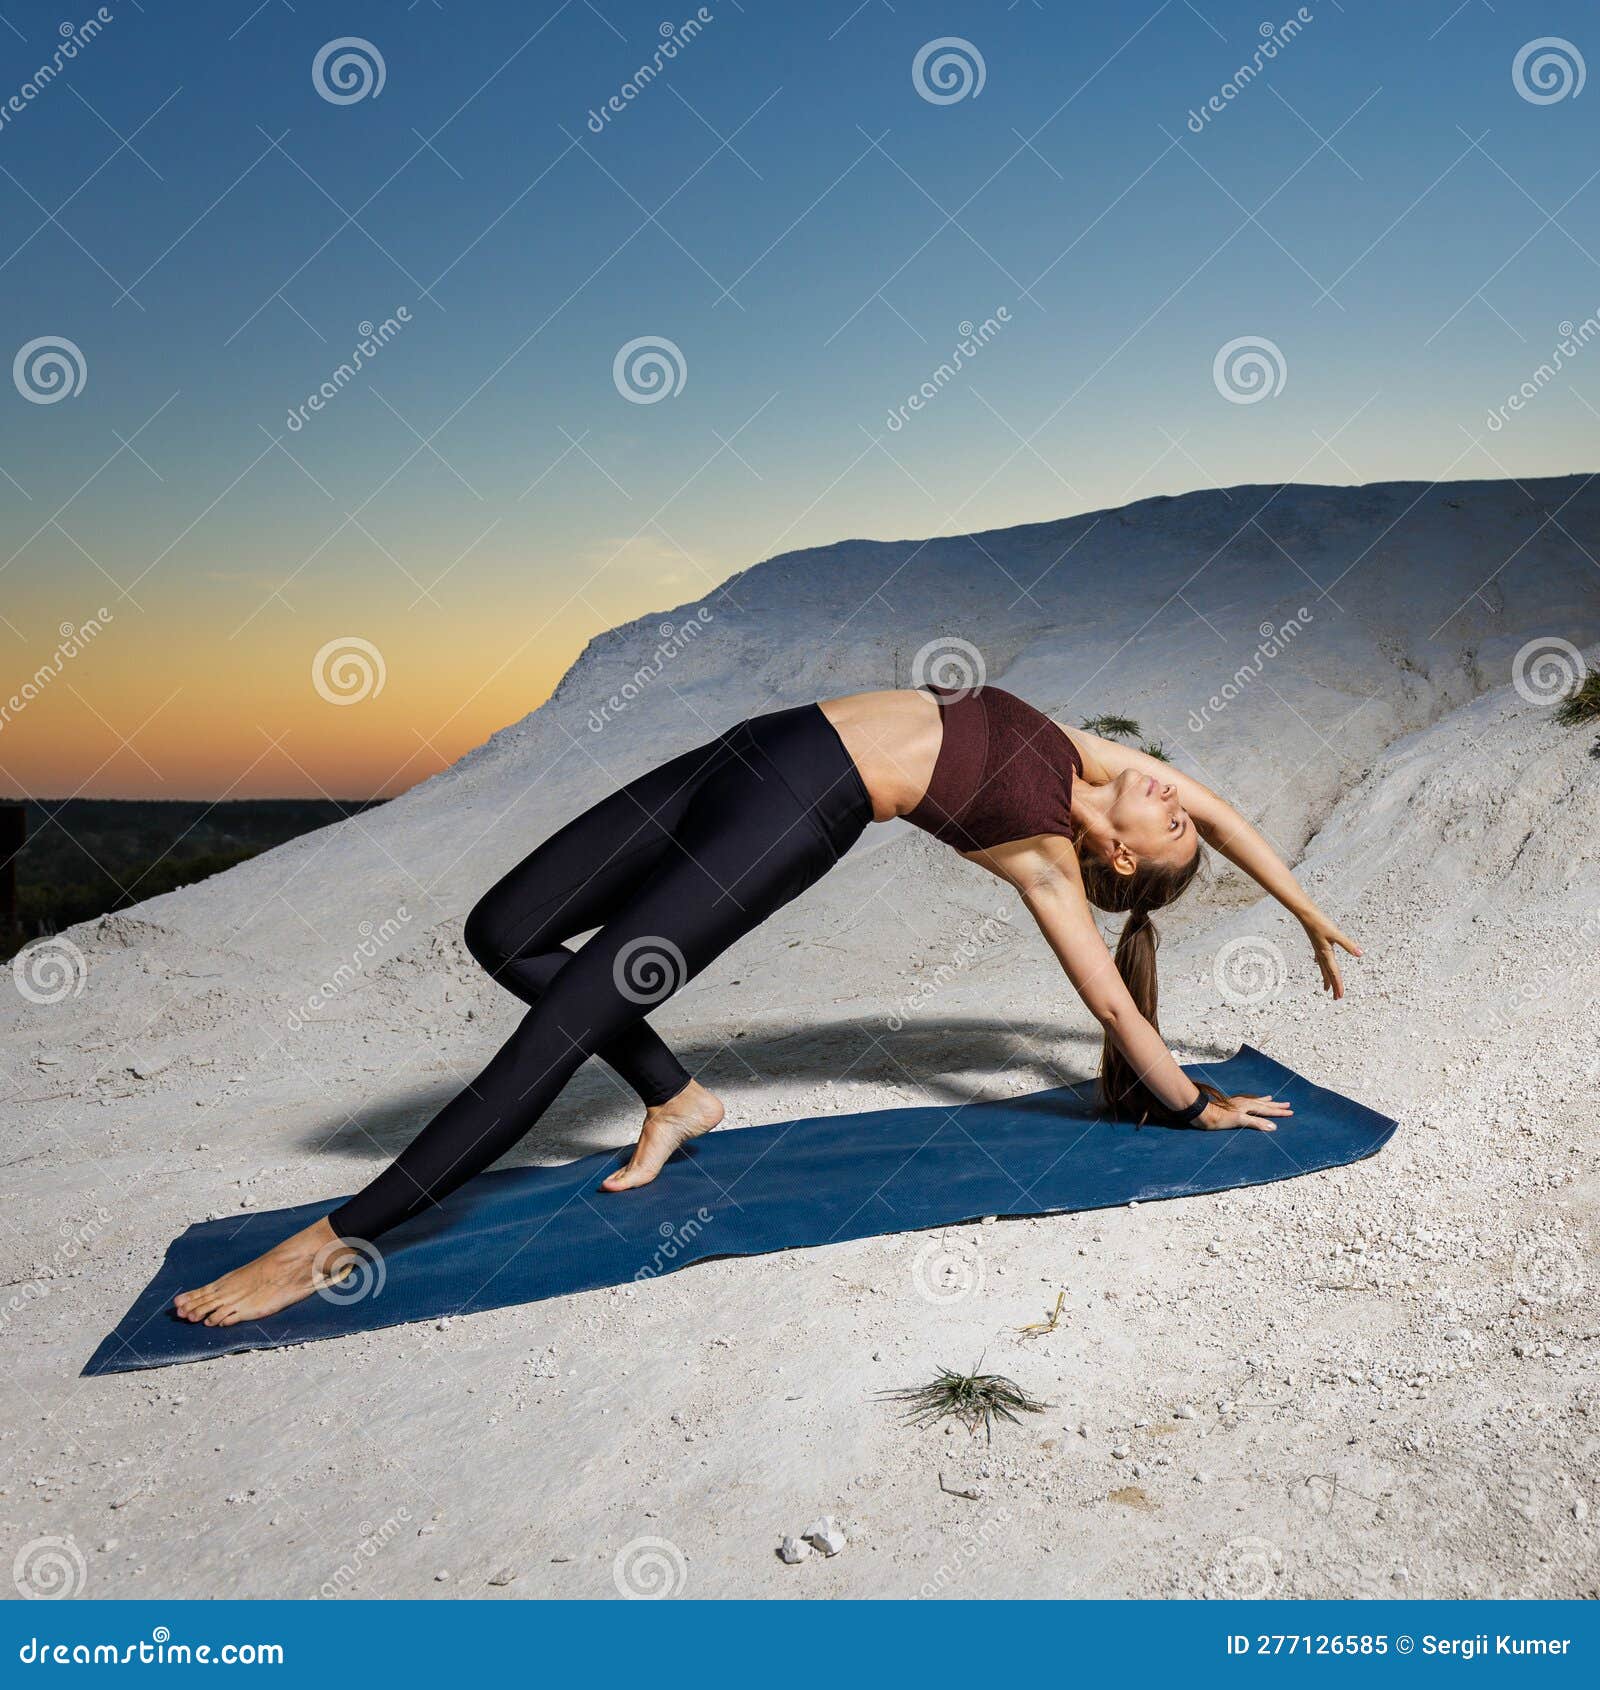 Woman doing Wild Thing yoga pose outdoors. Female practicing